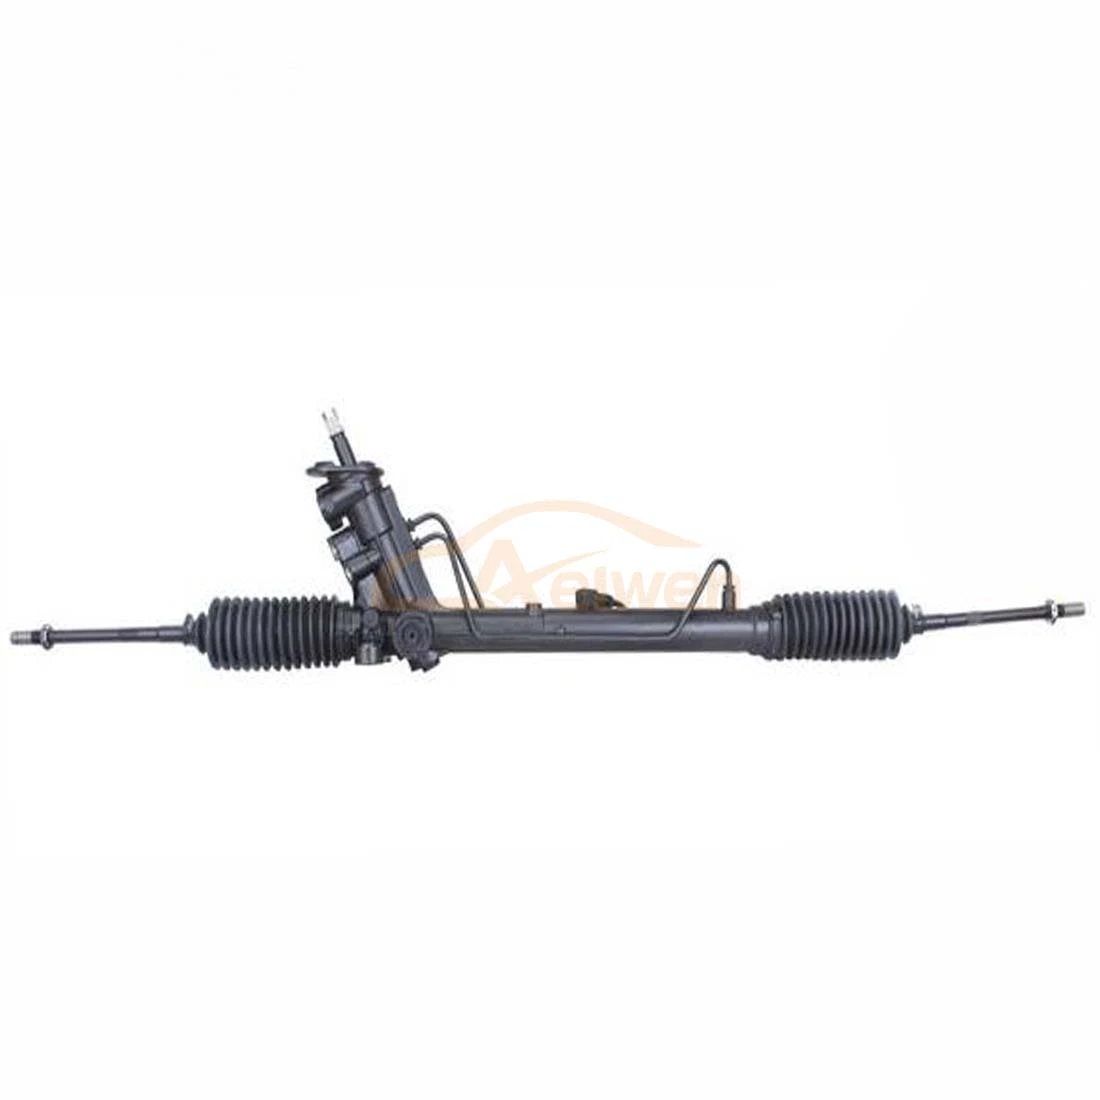 Hot Selling Aelwen Auto Steering Gear Used for Audi Part No. 6r1423055K